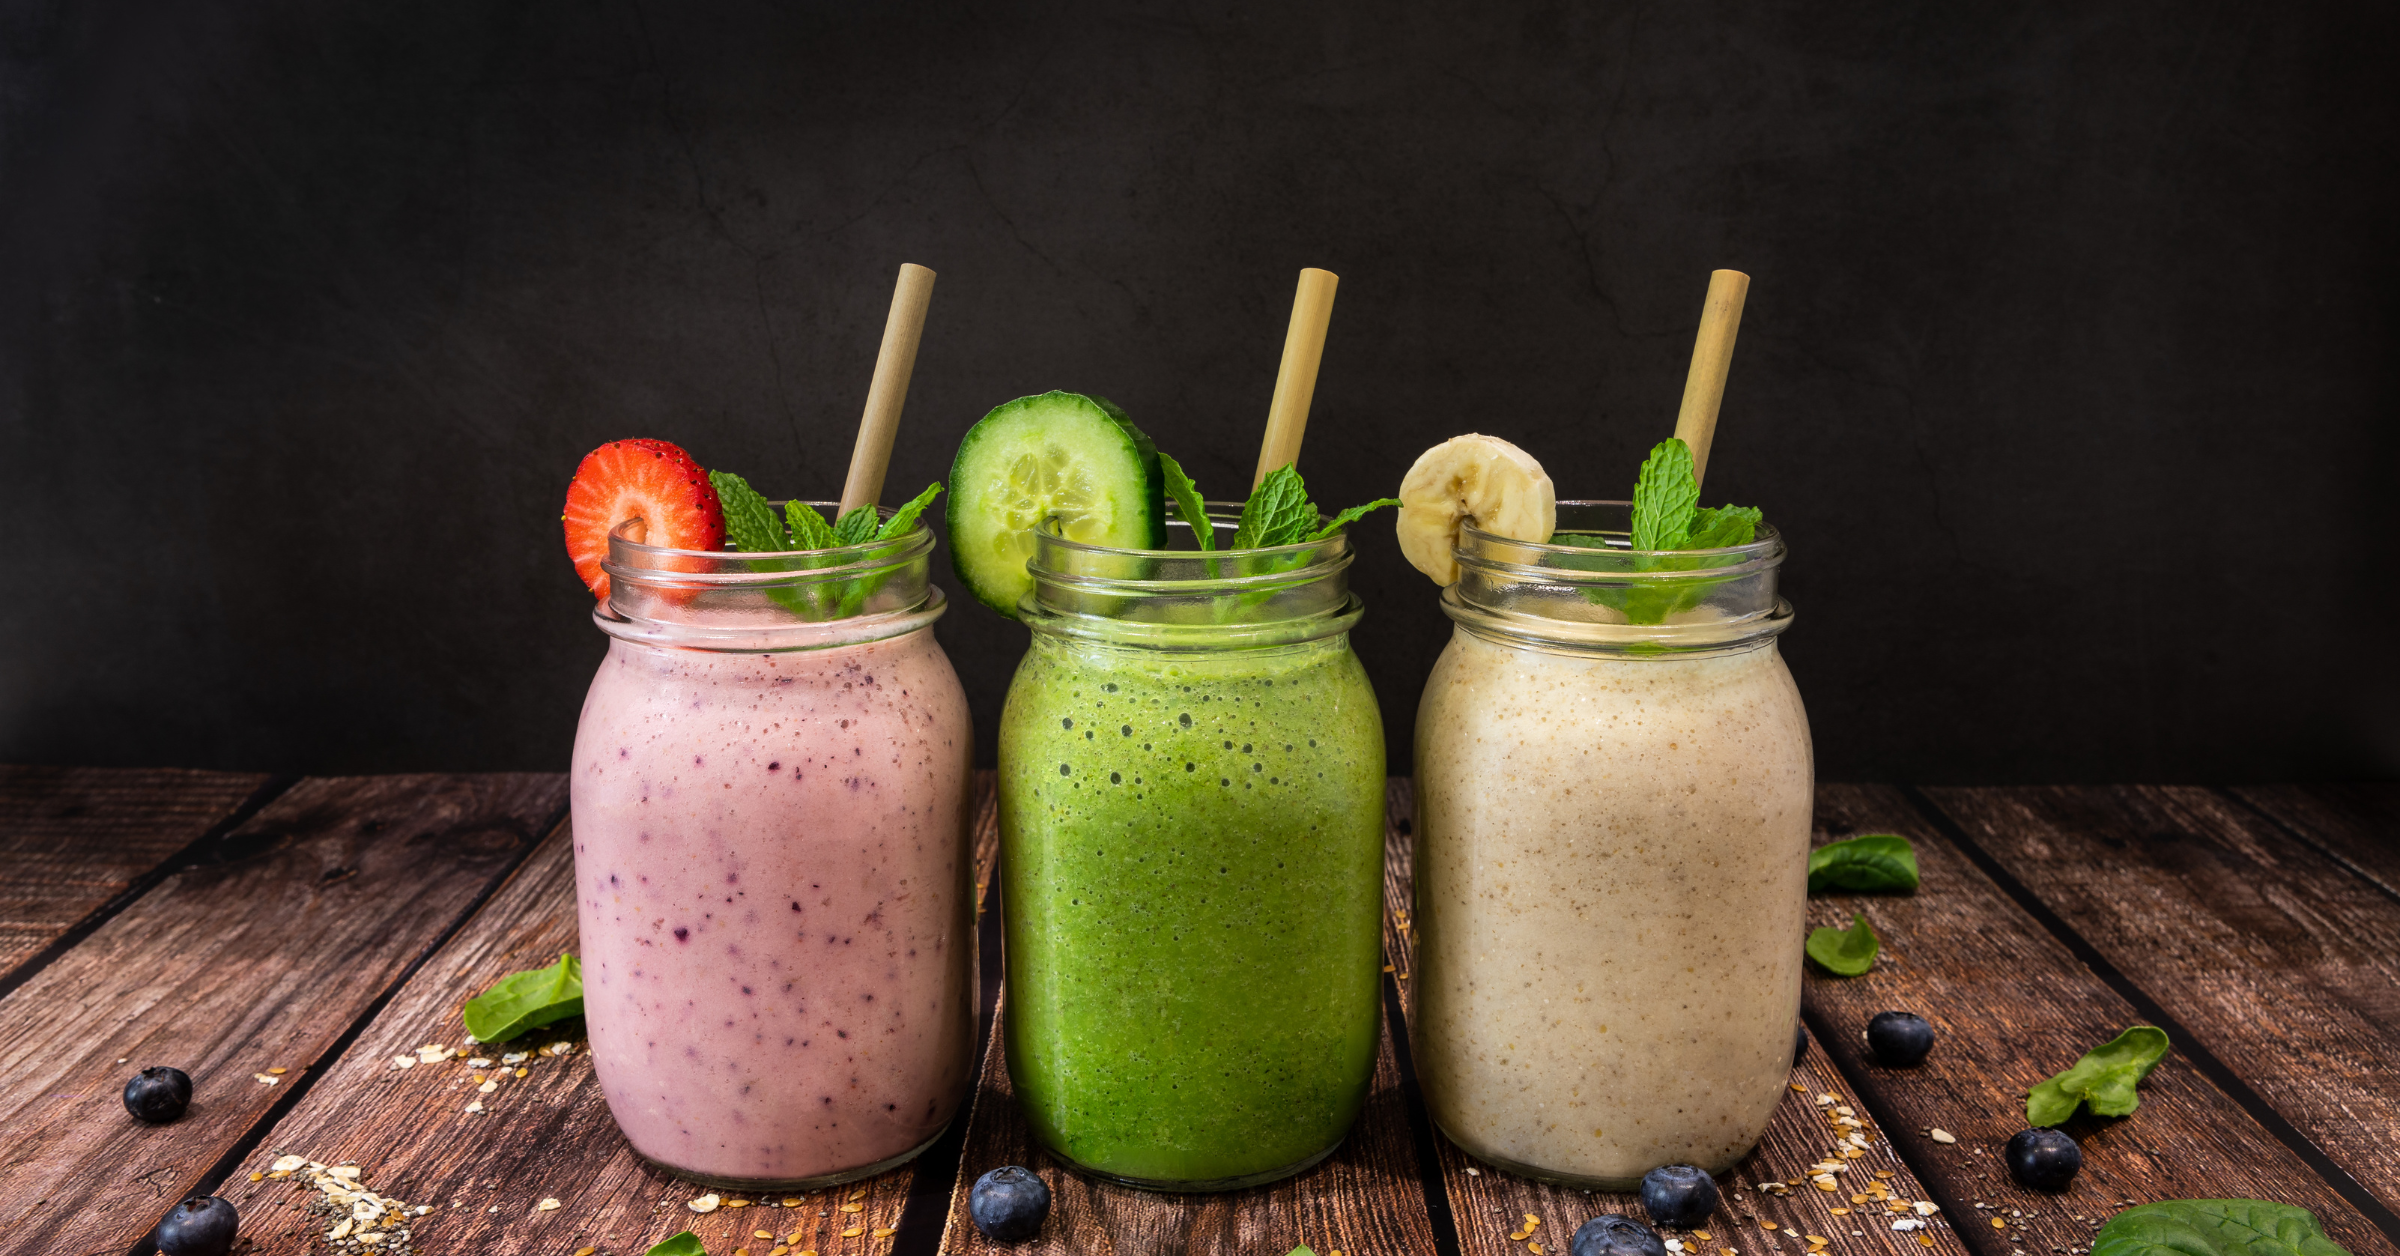 Discover delicious blood sugar-friendly smoothie recipes, learn about the impact of parasites on health, explore insights into HIV, and uncover the benefits of C15 in this comprehensive health and wellness episode.